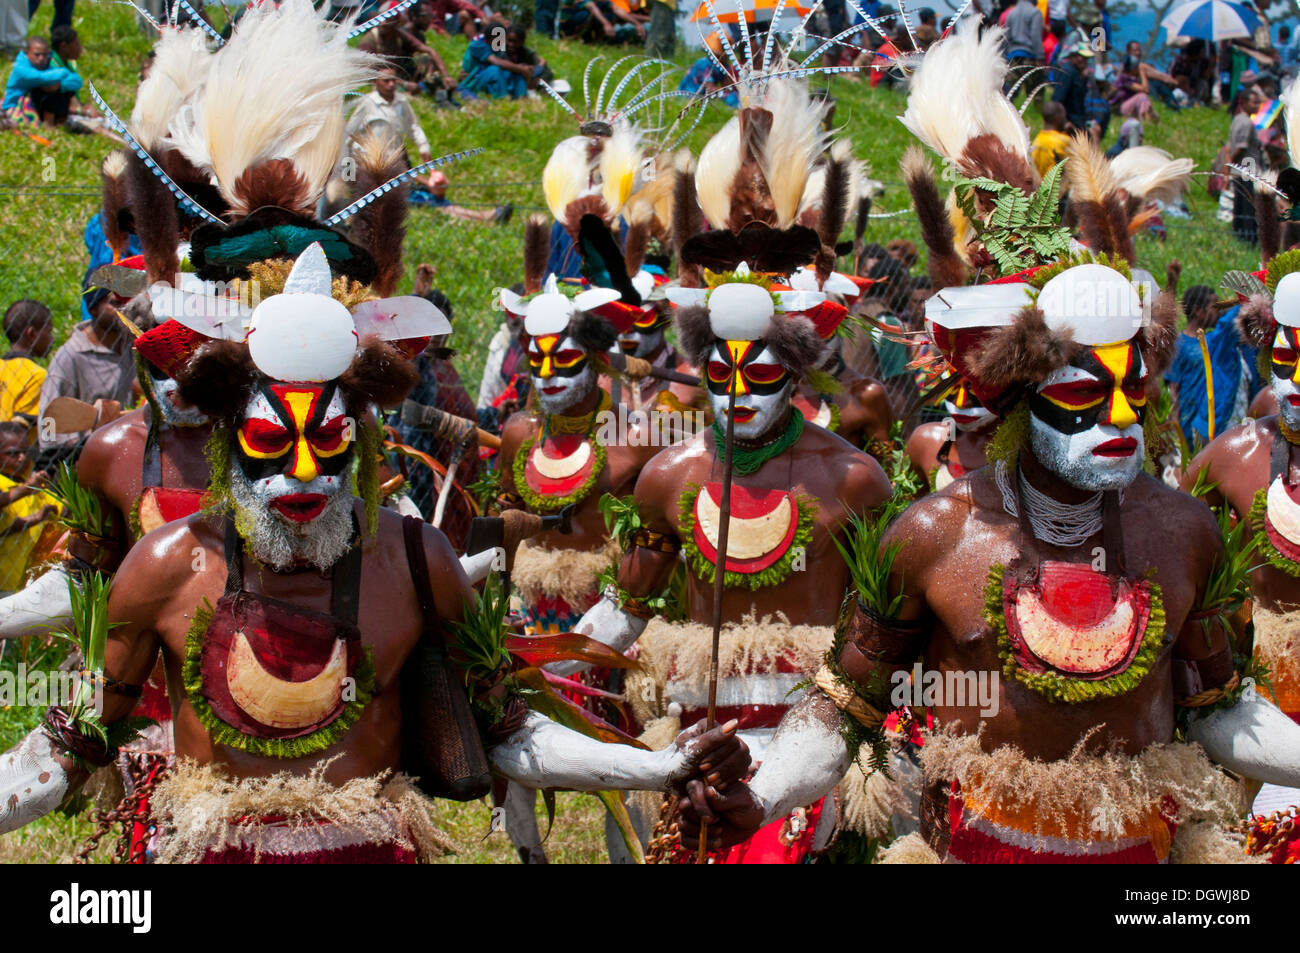 Members of a tribe in colourfully decorated costumes with face paint at the traditional sing-sing gathering, Hochland Stock Photo